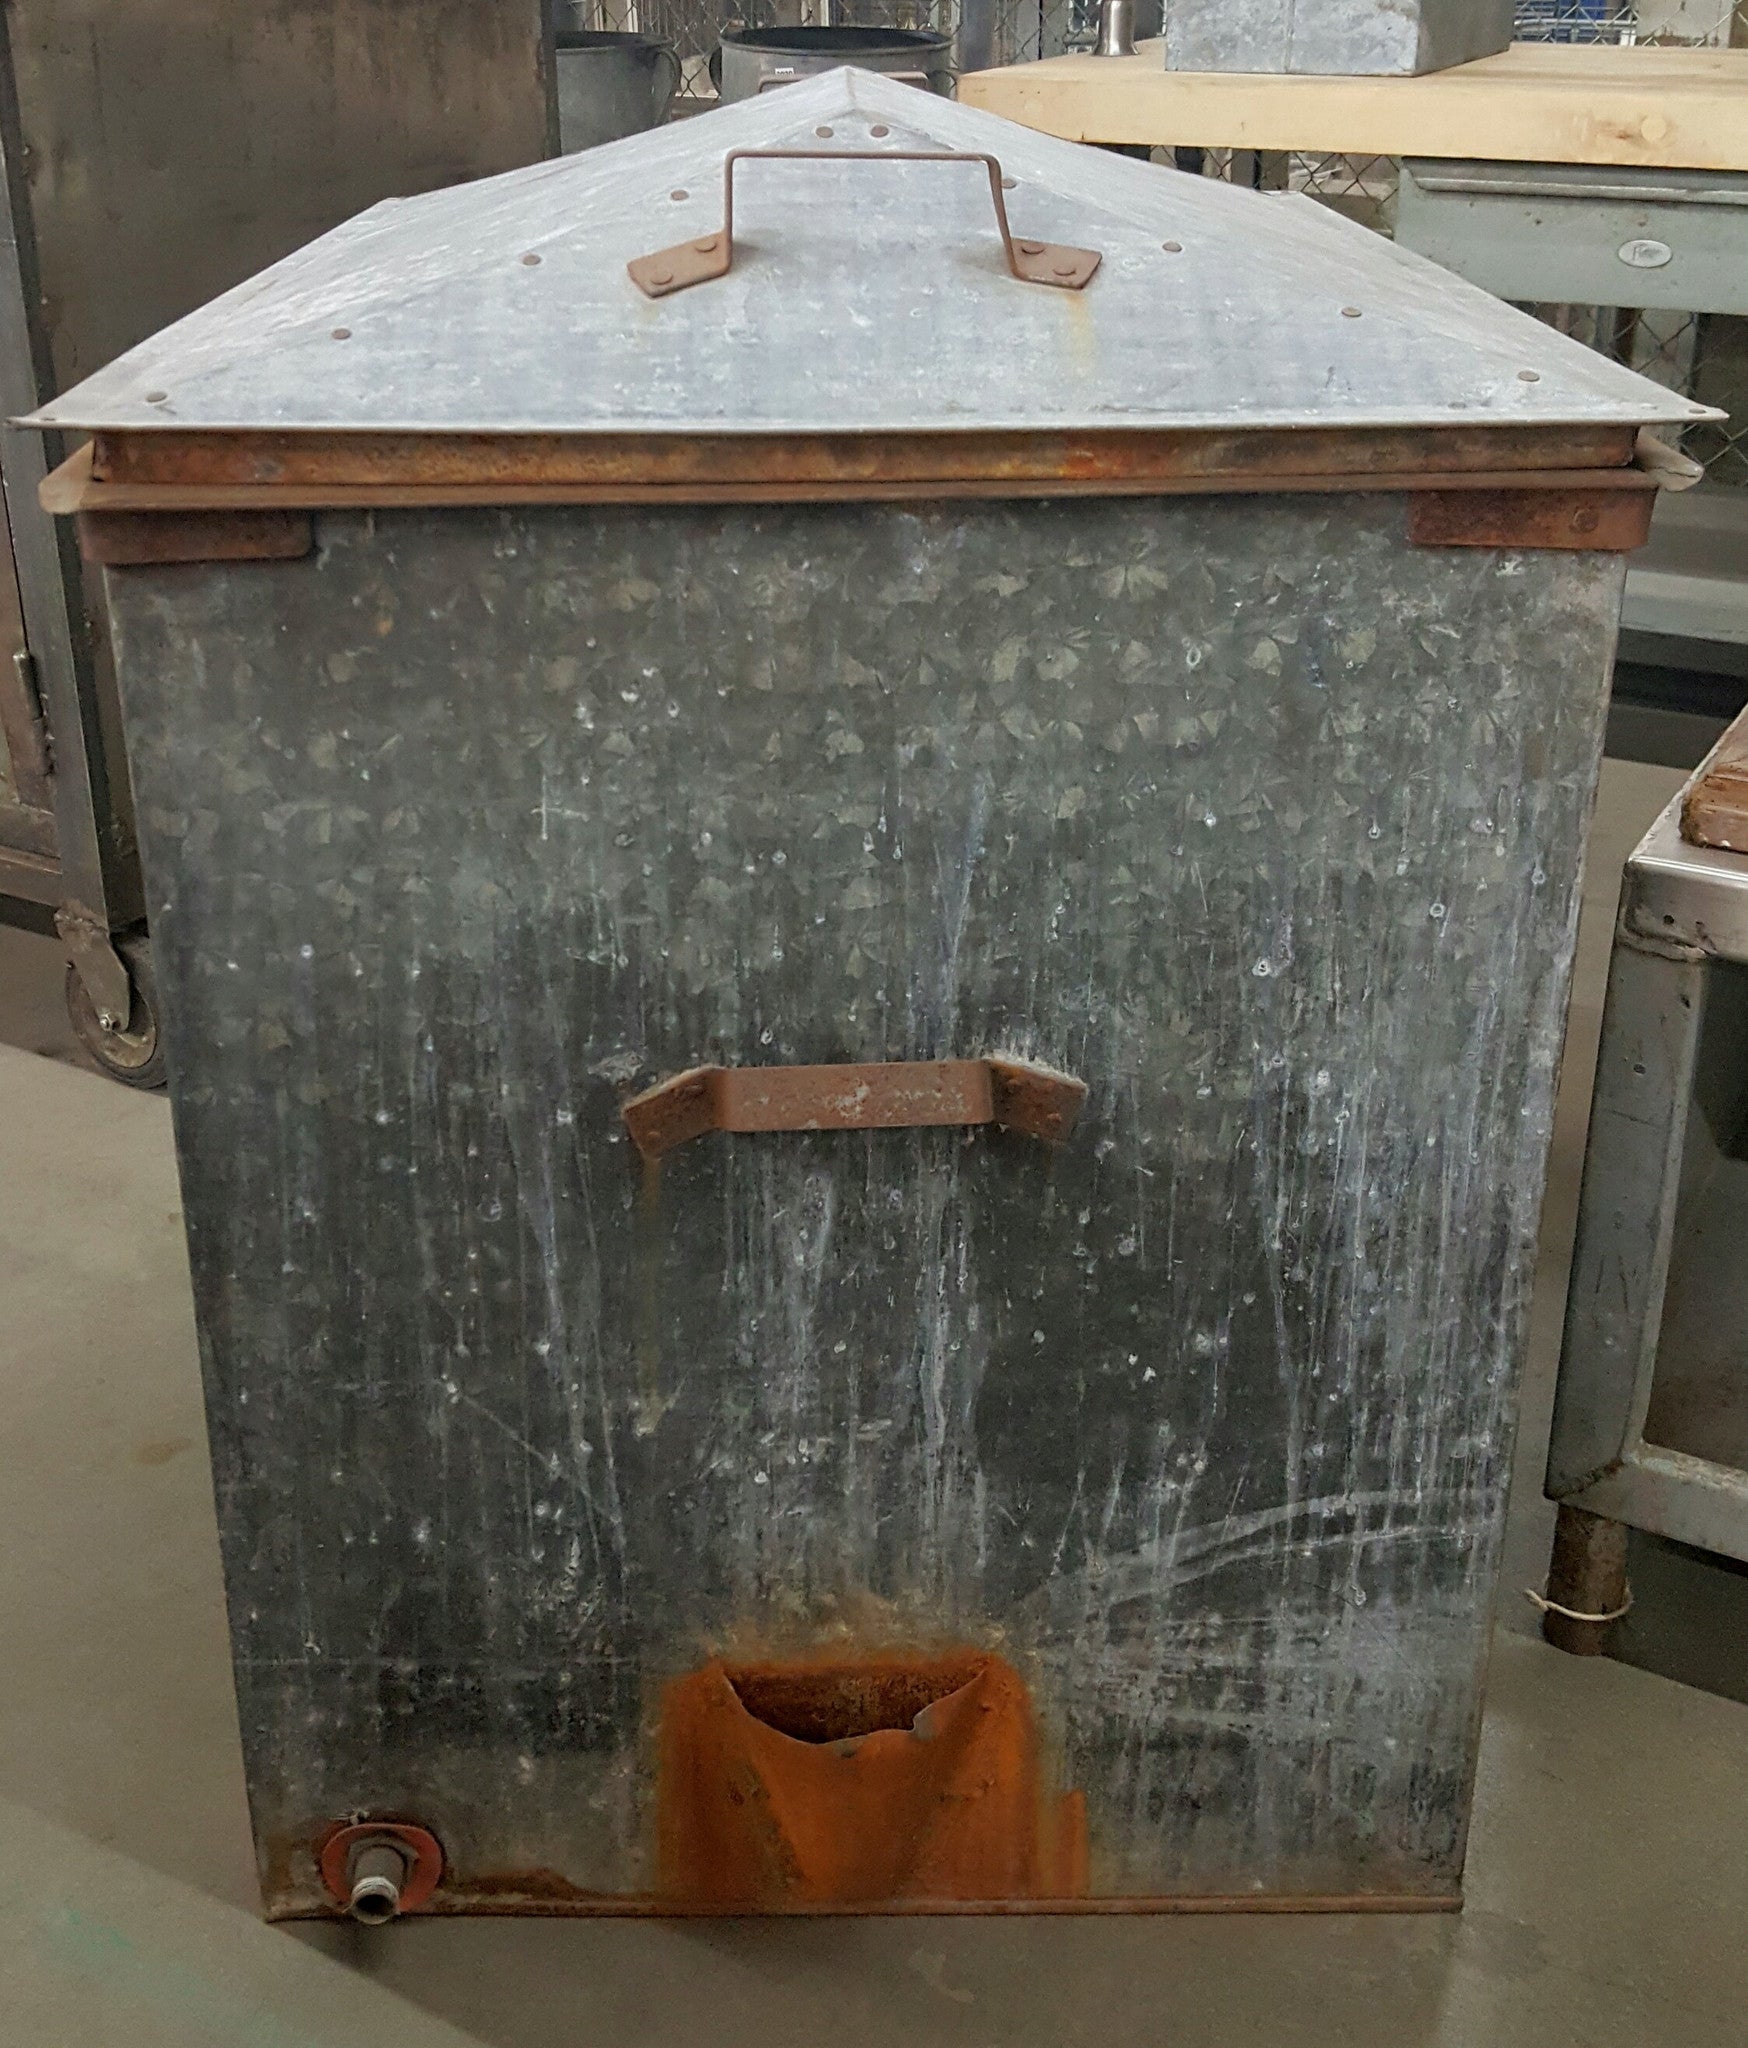 Large metal container